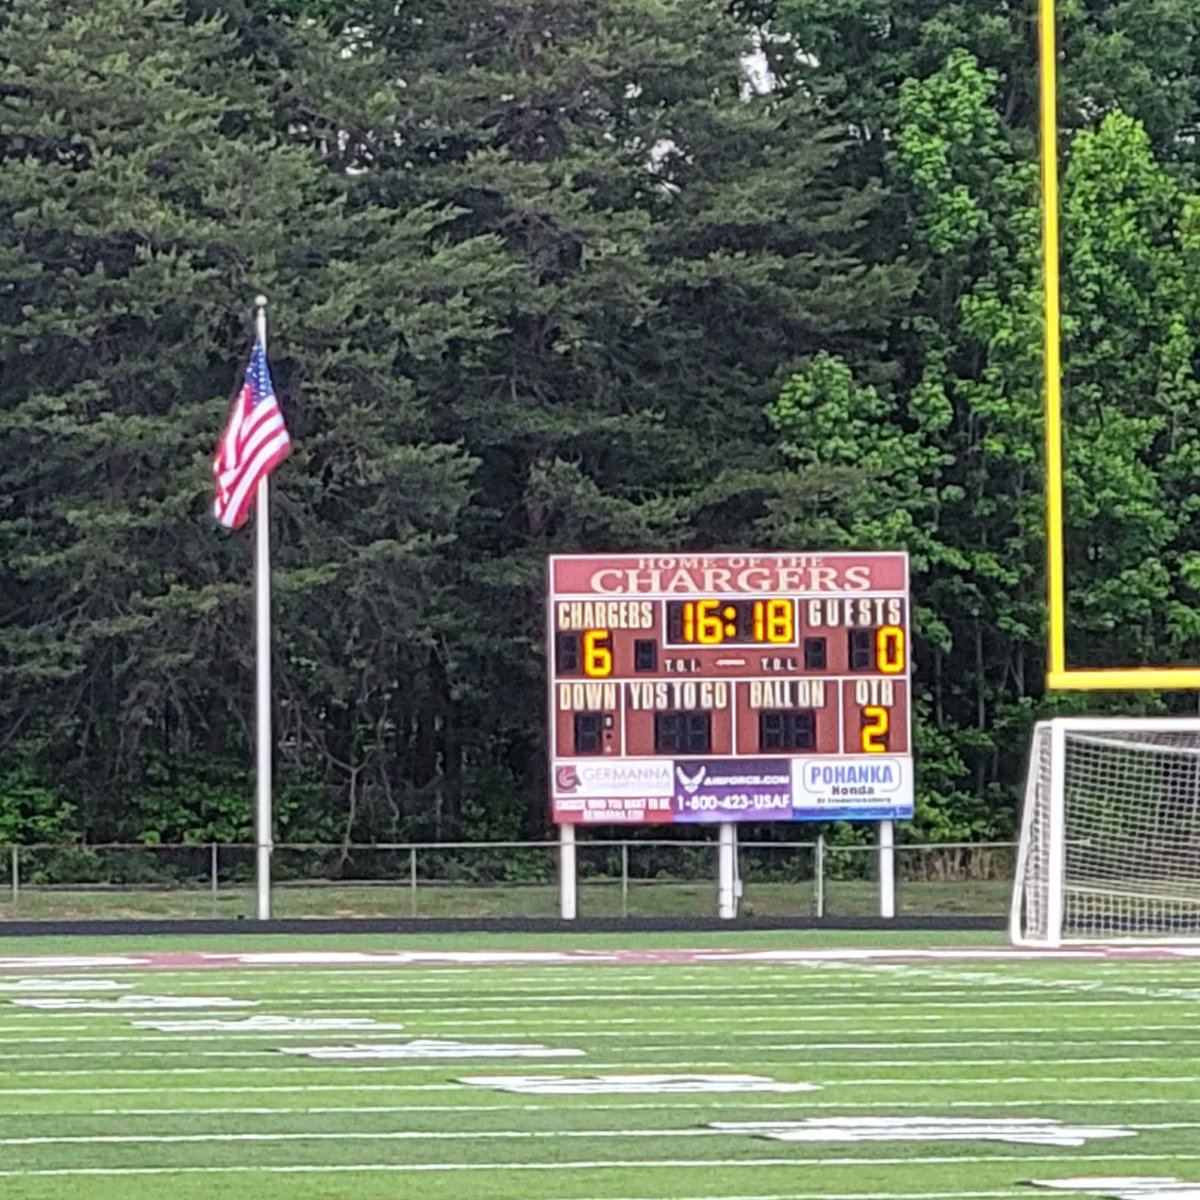 ..Congratulations to our Boys Soccer team on their Region Tournament victory over Dinwiddie...8 to 0.
The Chargers will now travel to Mechanicsville on Thurs.
-also Girls Soccer Team-tied 1 to 1 with Courtland at the half but fell 3 to 1.
#LeadTheCharge